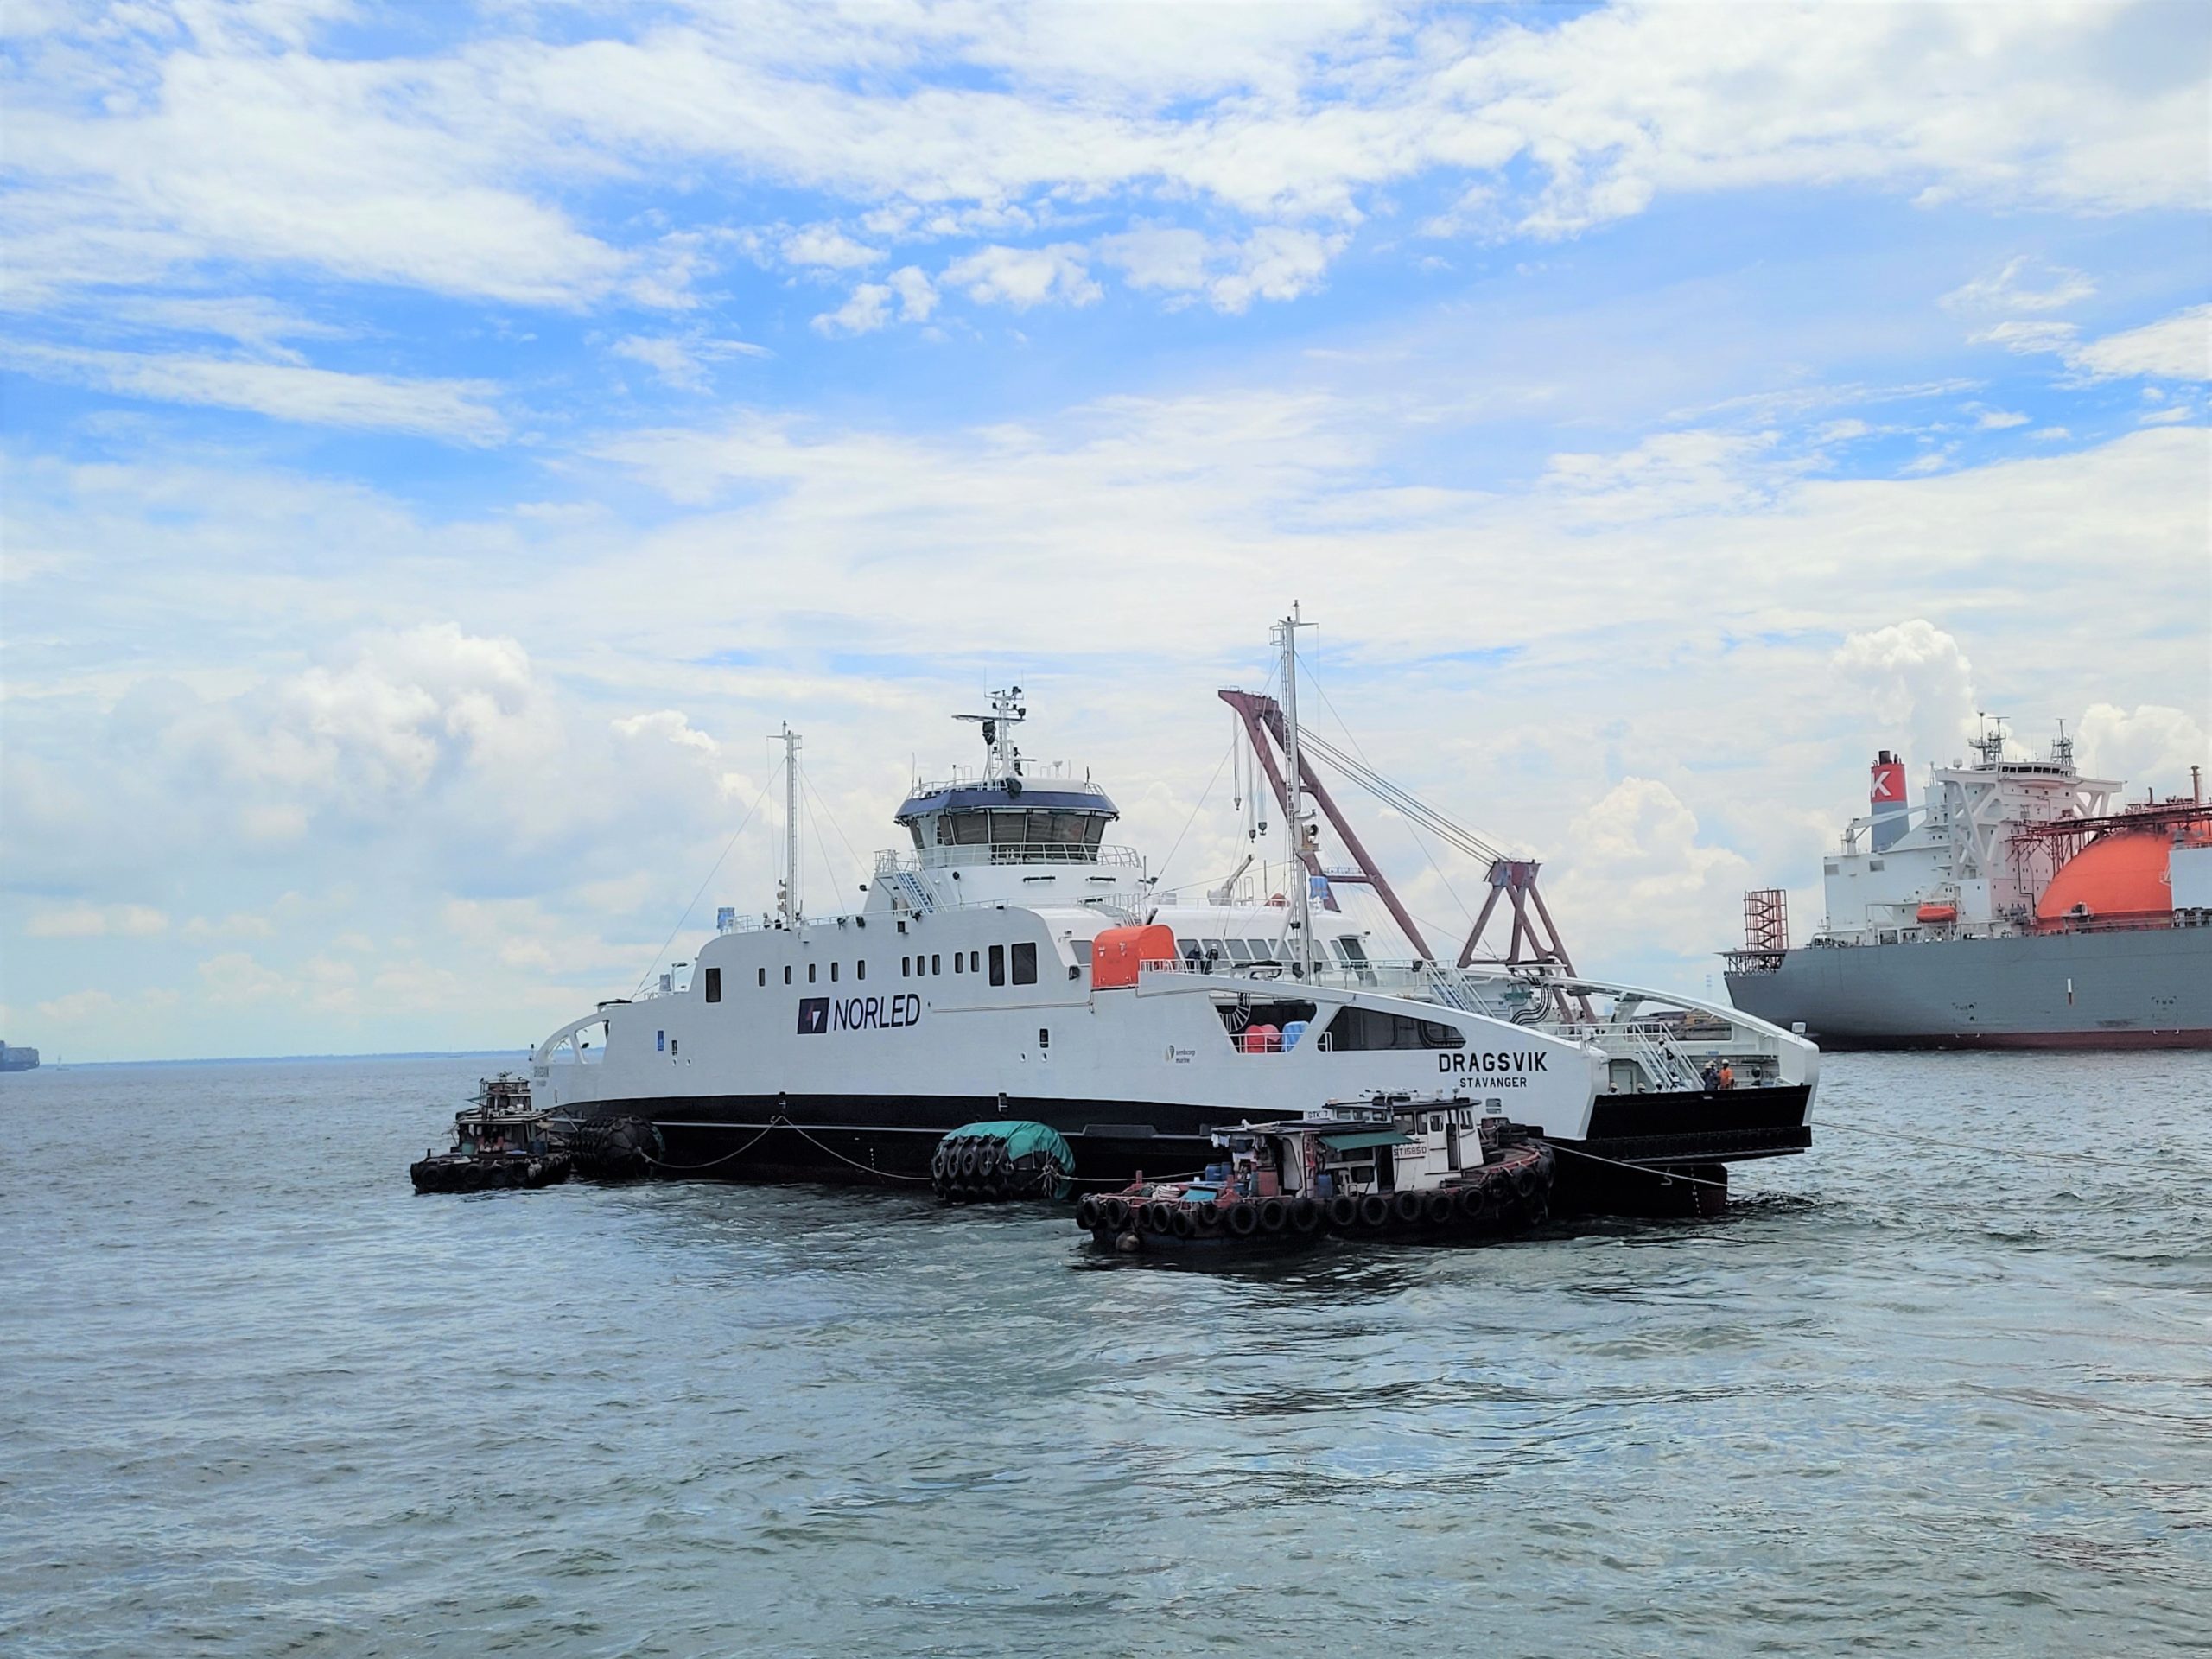 Sembcorp Marine Delivers Second Zero-Emission Battery-Powered Ferry to Norled